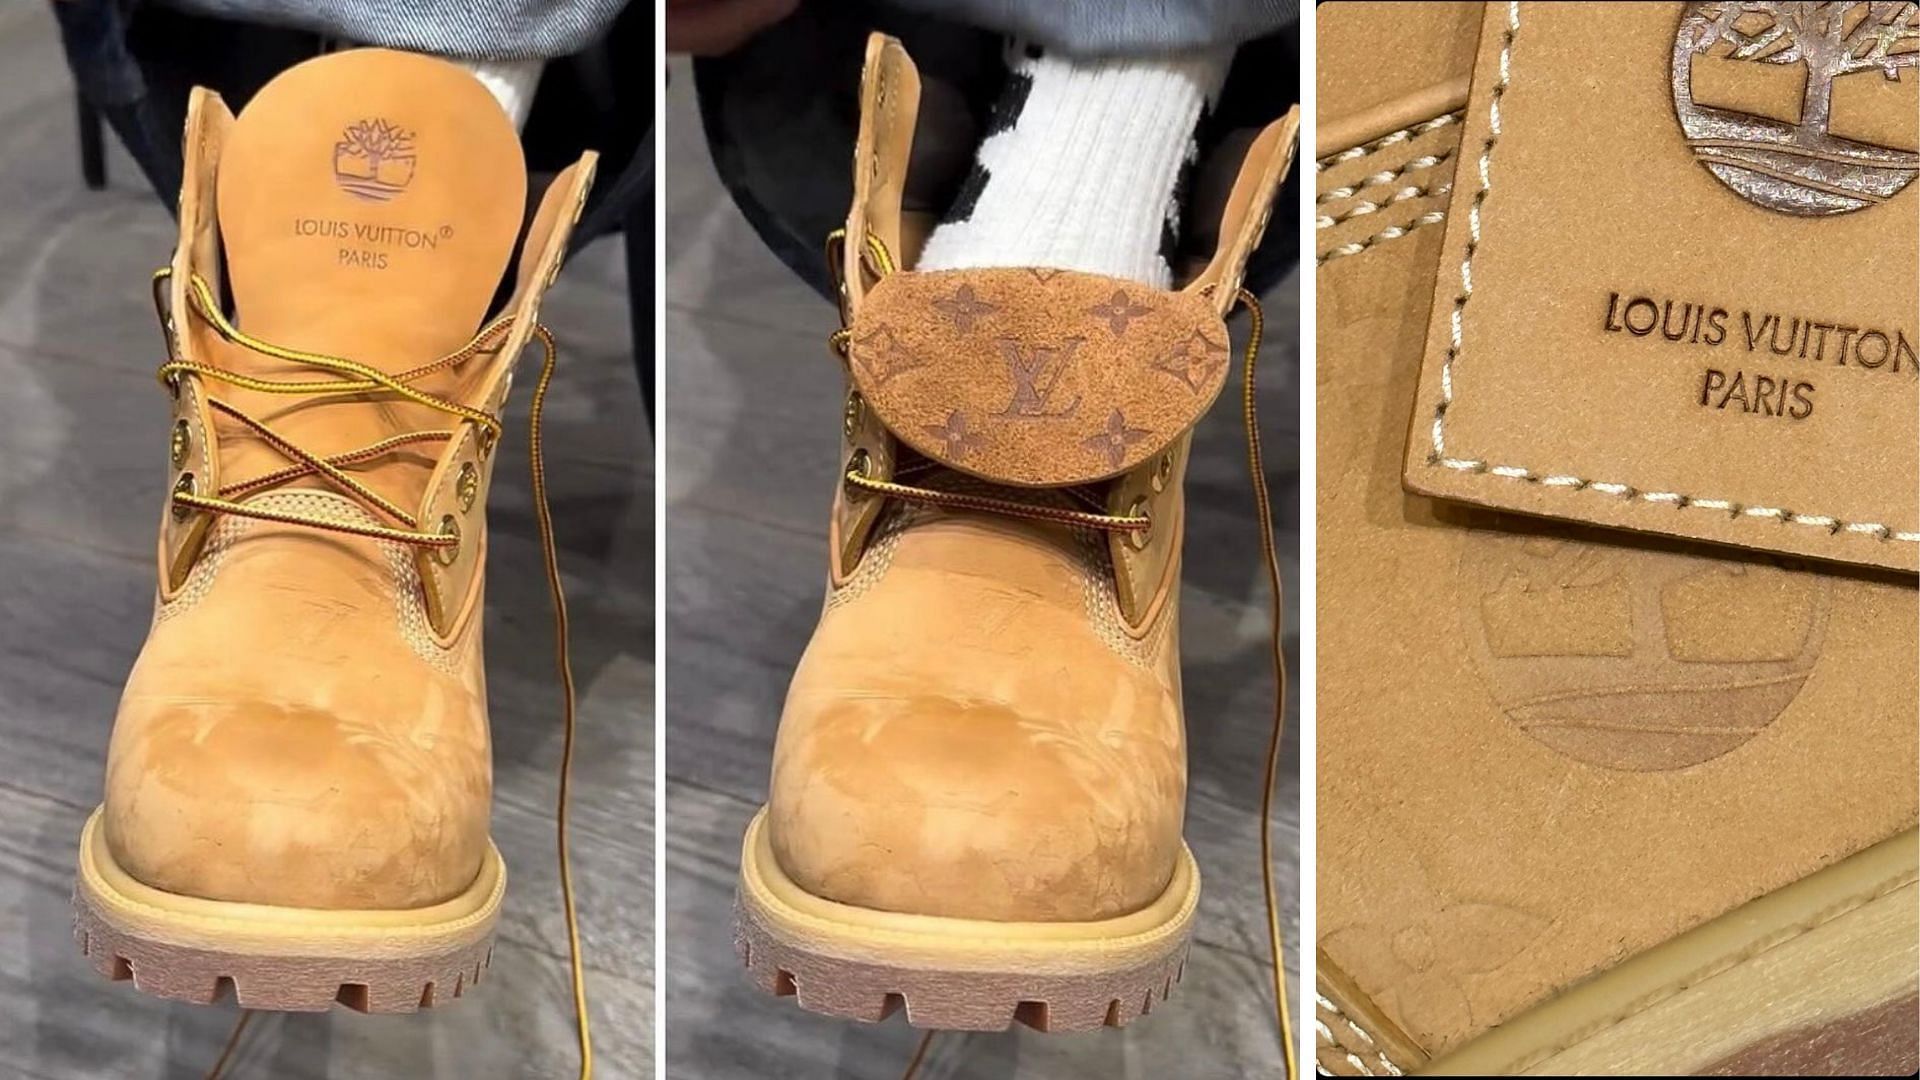 Take a closer look at the branding accents of Louis Vuitton Timberland 6-inch boot (Image via Instagram/@skateboard)